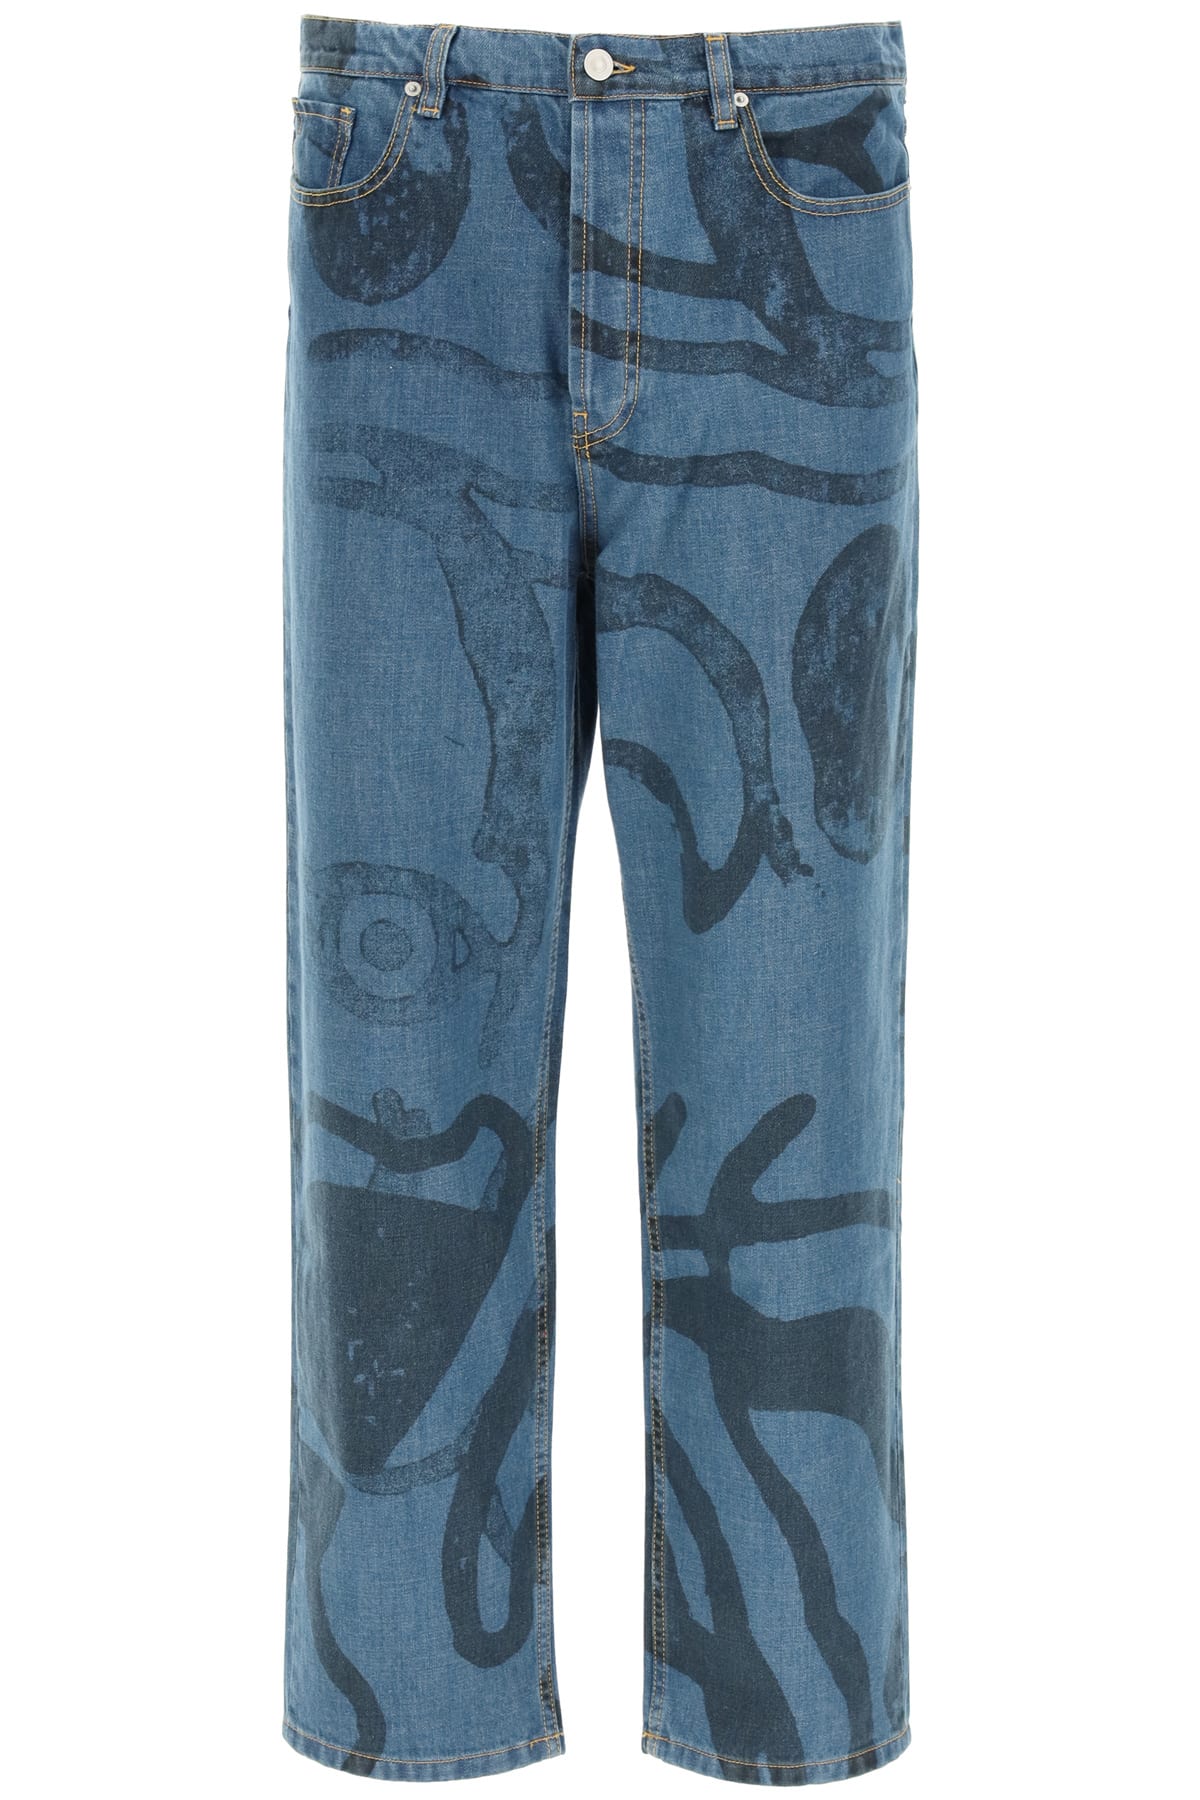 Kenzo Large Jeans With K-tiger Print